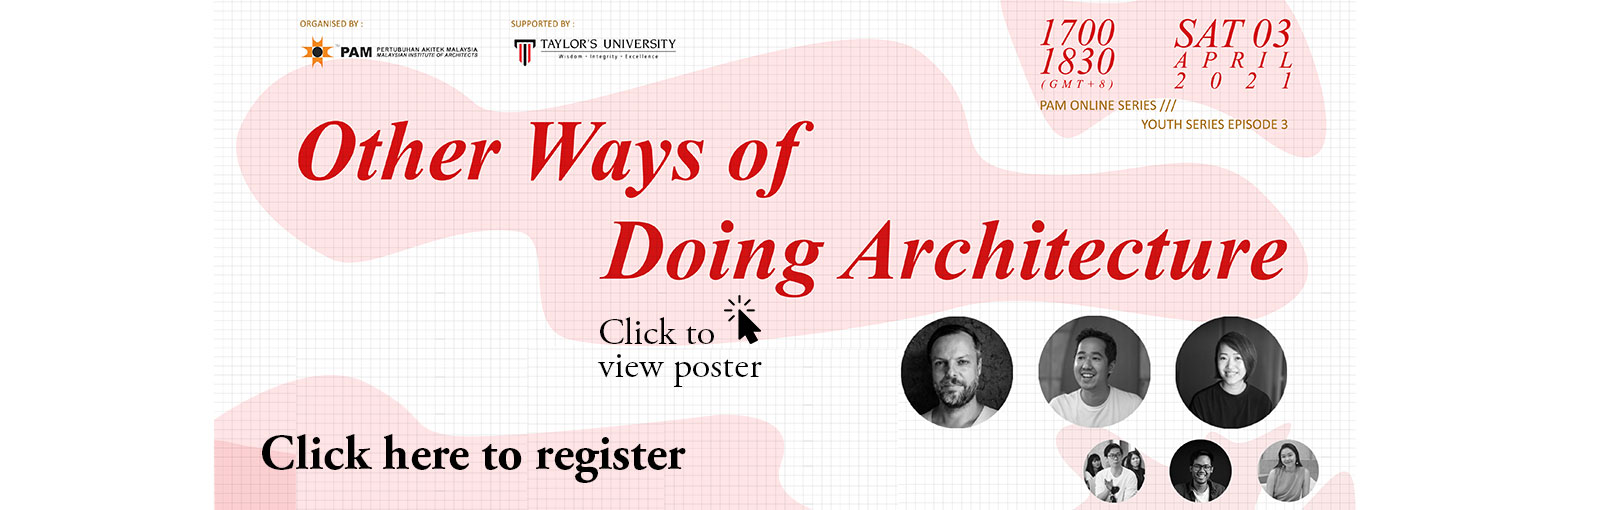 PAM Online Series: Youth Series Episode 3: Other Ways of Doing Architecture